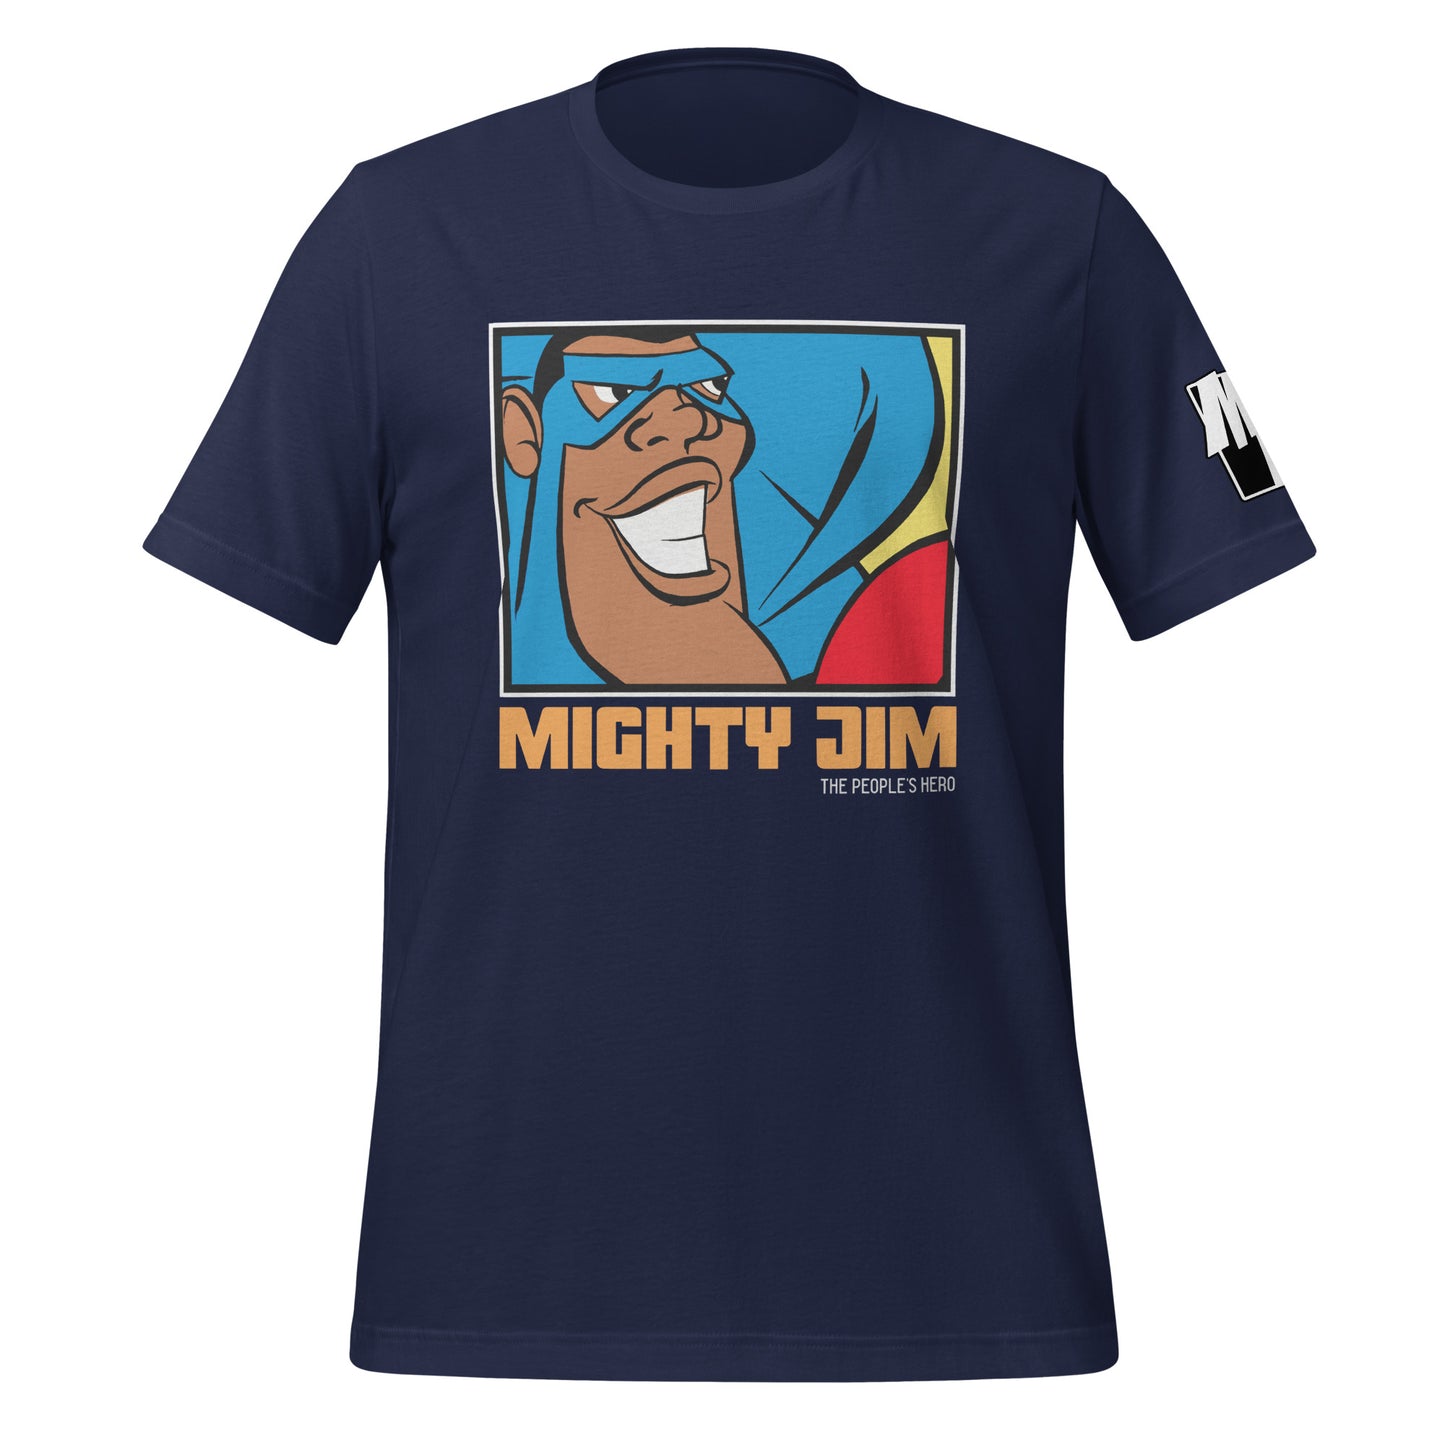 MIGHTY JIM (THE PEOPLE'S HERO) T-Shirt